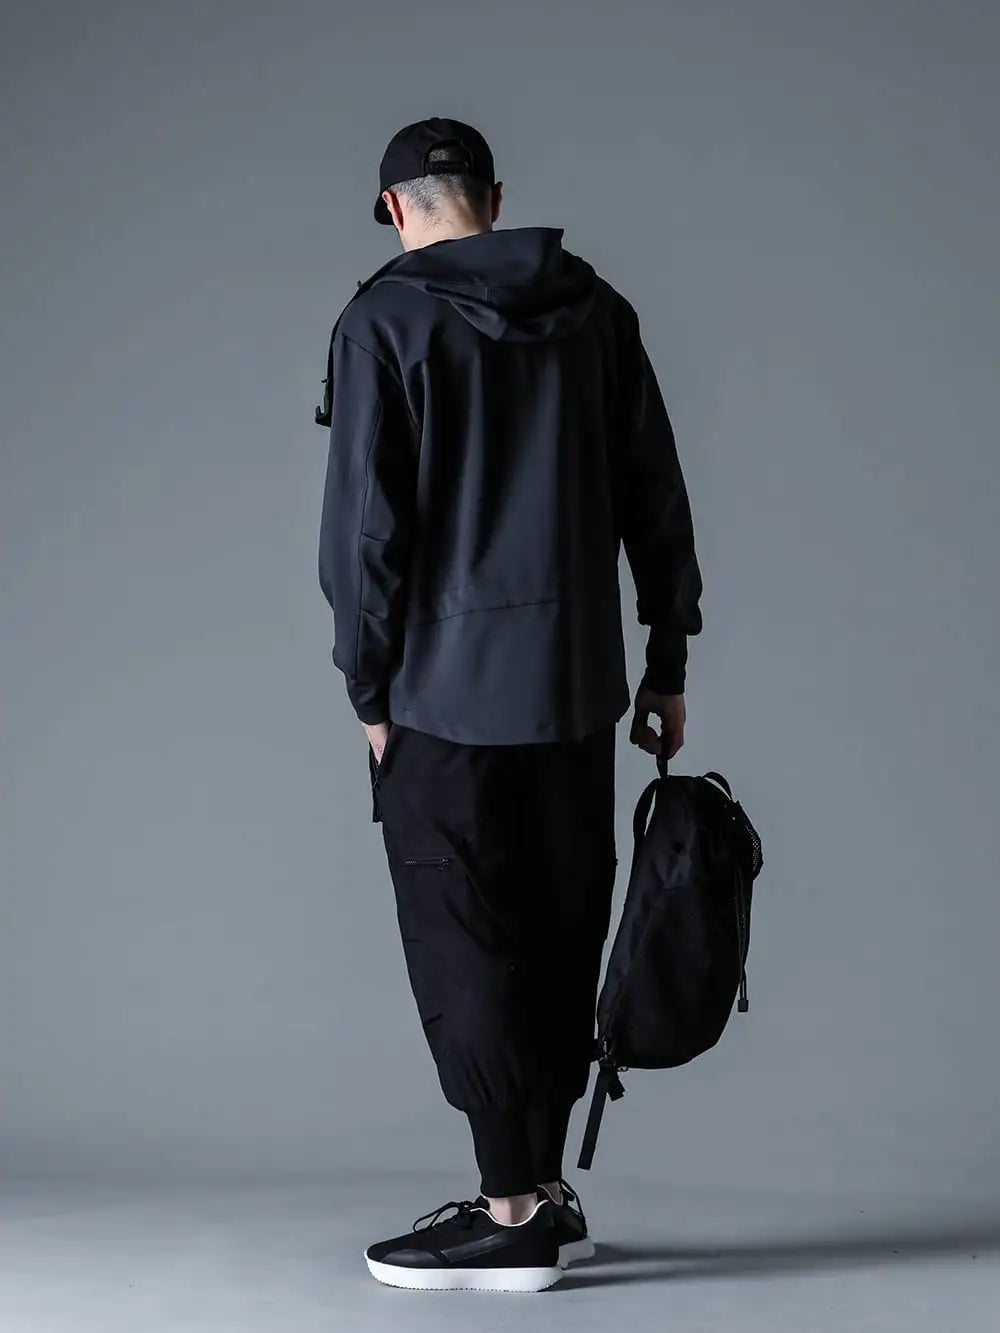 RIPVANWINKLE 24SS Styling - Proposing comfortable everyday wear with hooded jersey and RVW trainers that can be used immediately - RW-151 (FLOPPY CAP) - RW-629 (Hooded Jersey) - RW-639(Balloon Parachute) - RW-615(Rip Trainer Two Black) 1-005